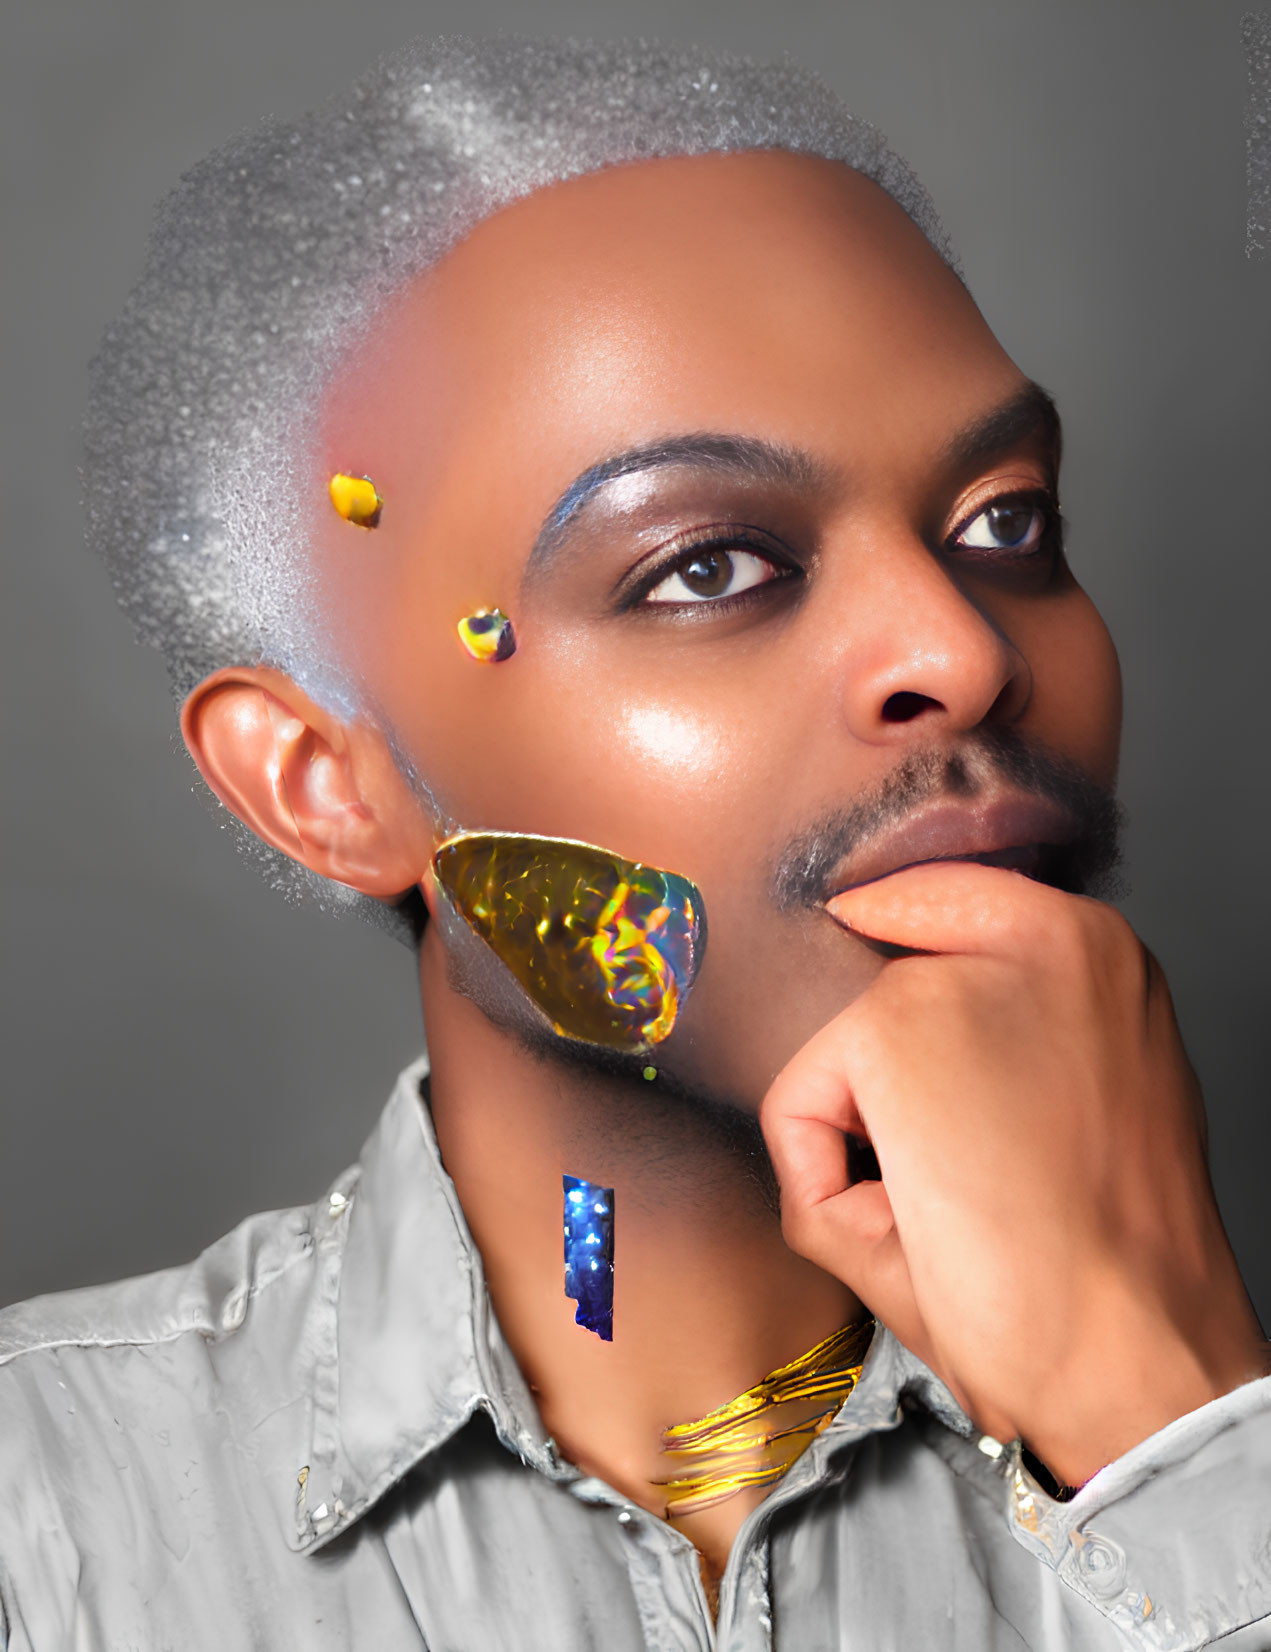 Portrait of individual with artistic makeup and colorful design on cheek and neck